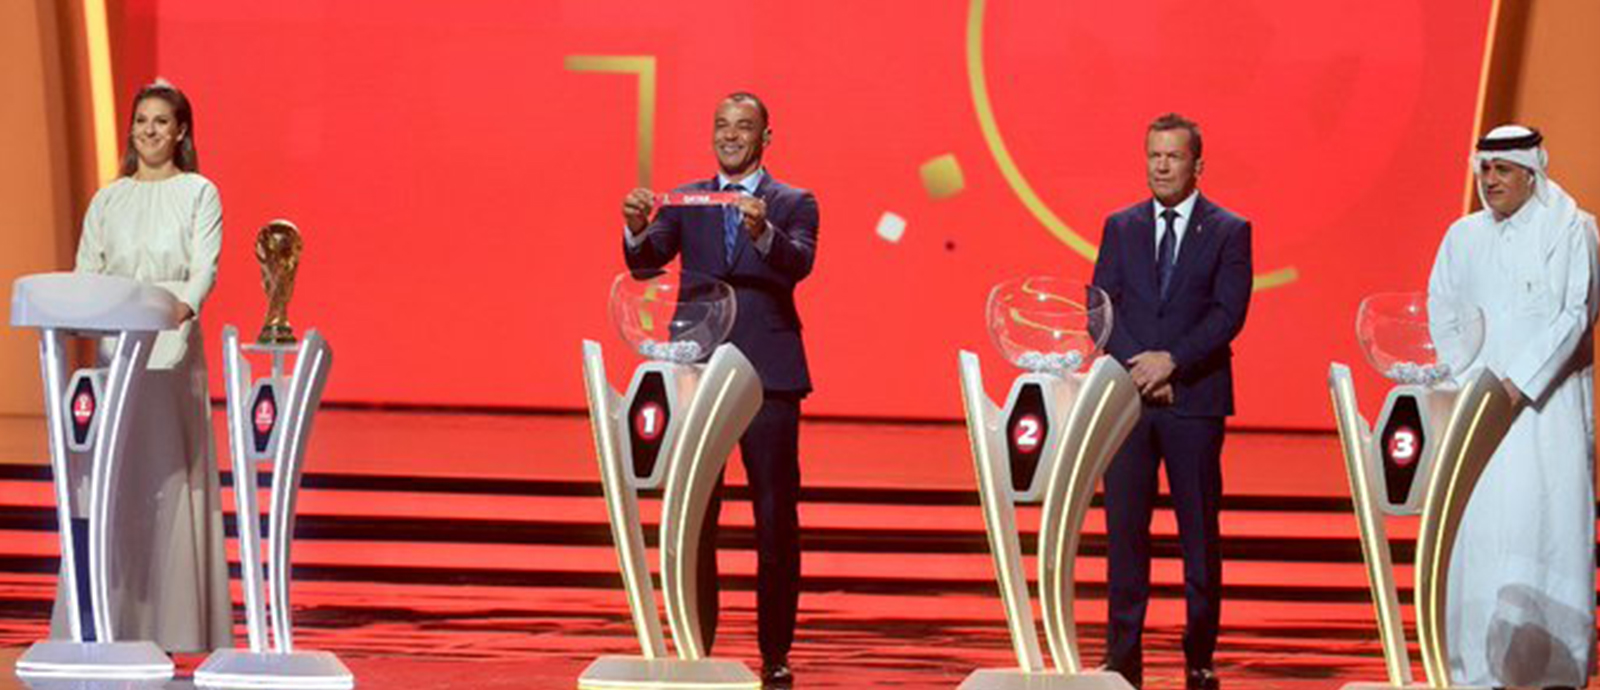 FIFA World Cup Qatar 2022™ ticket applications open to fans